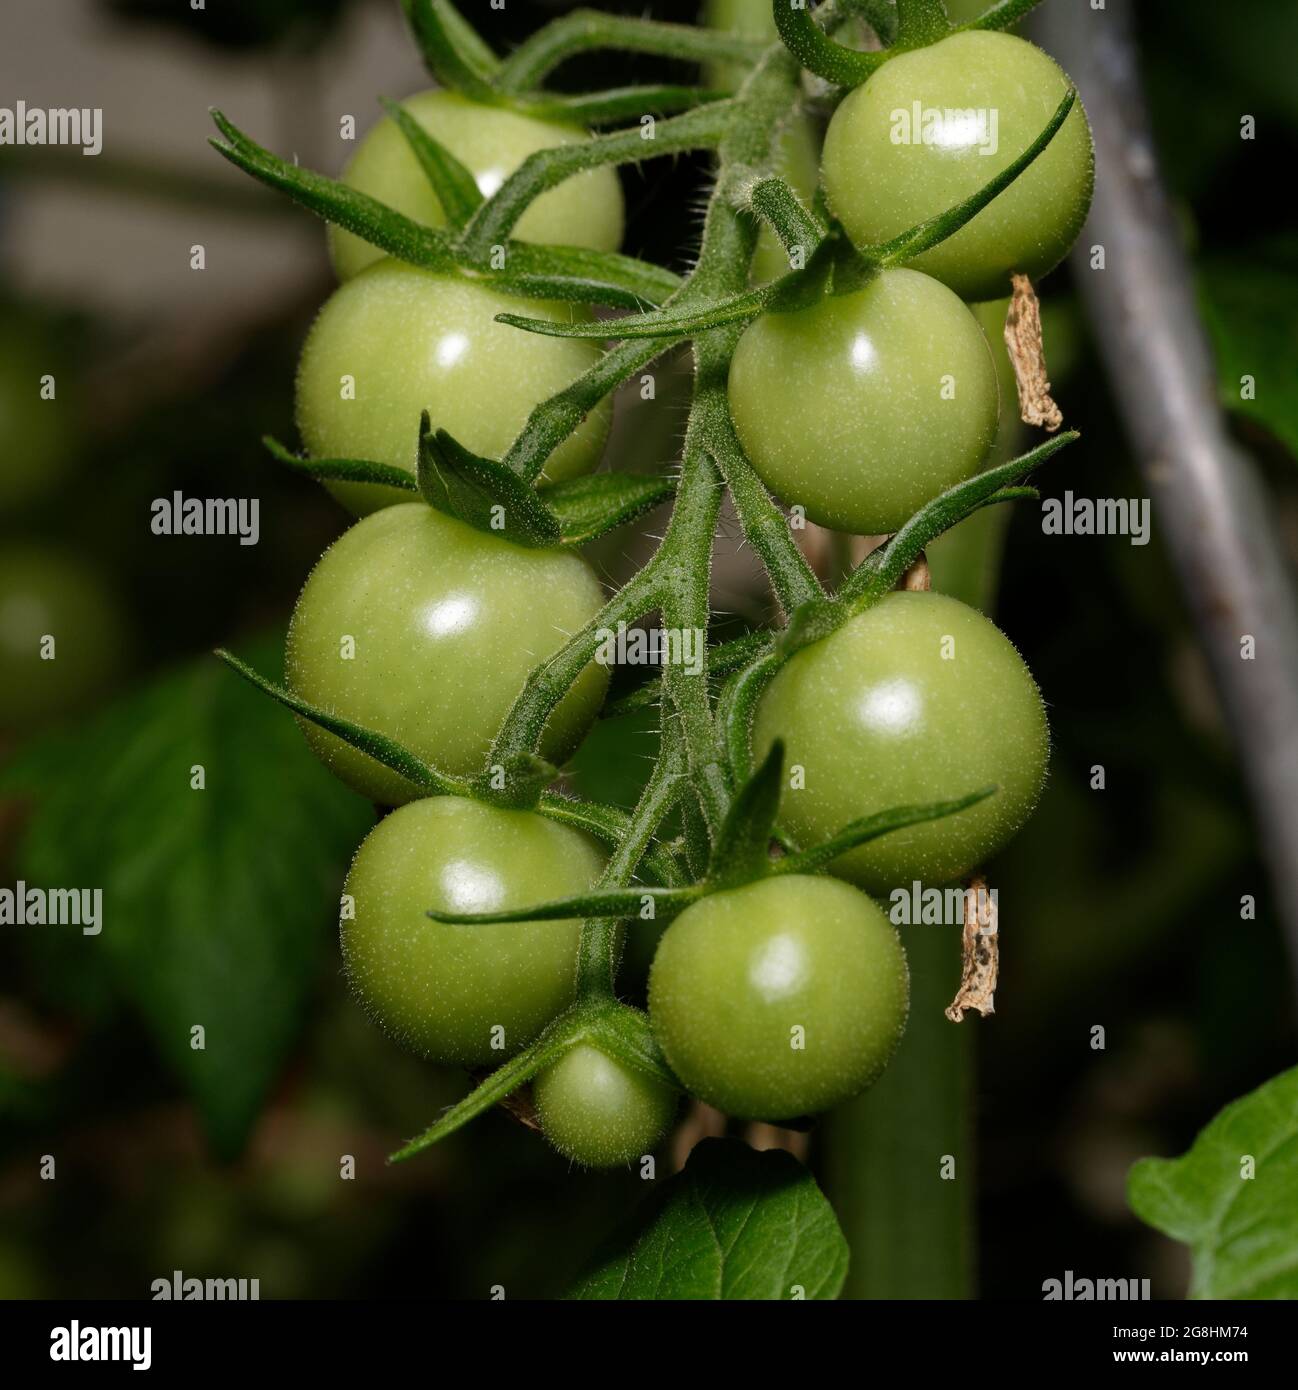 unripe still green tomatoes hanging on a branch Stock Photo